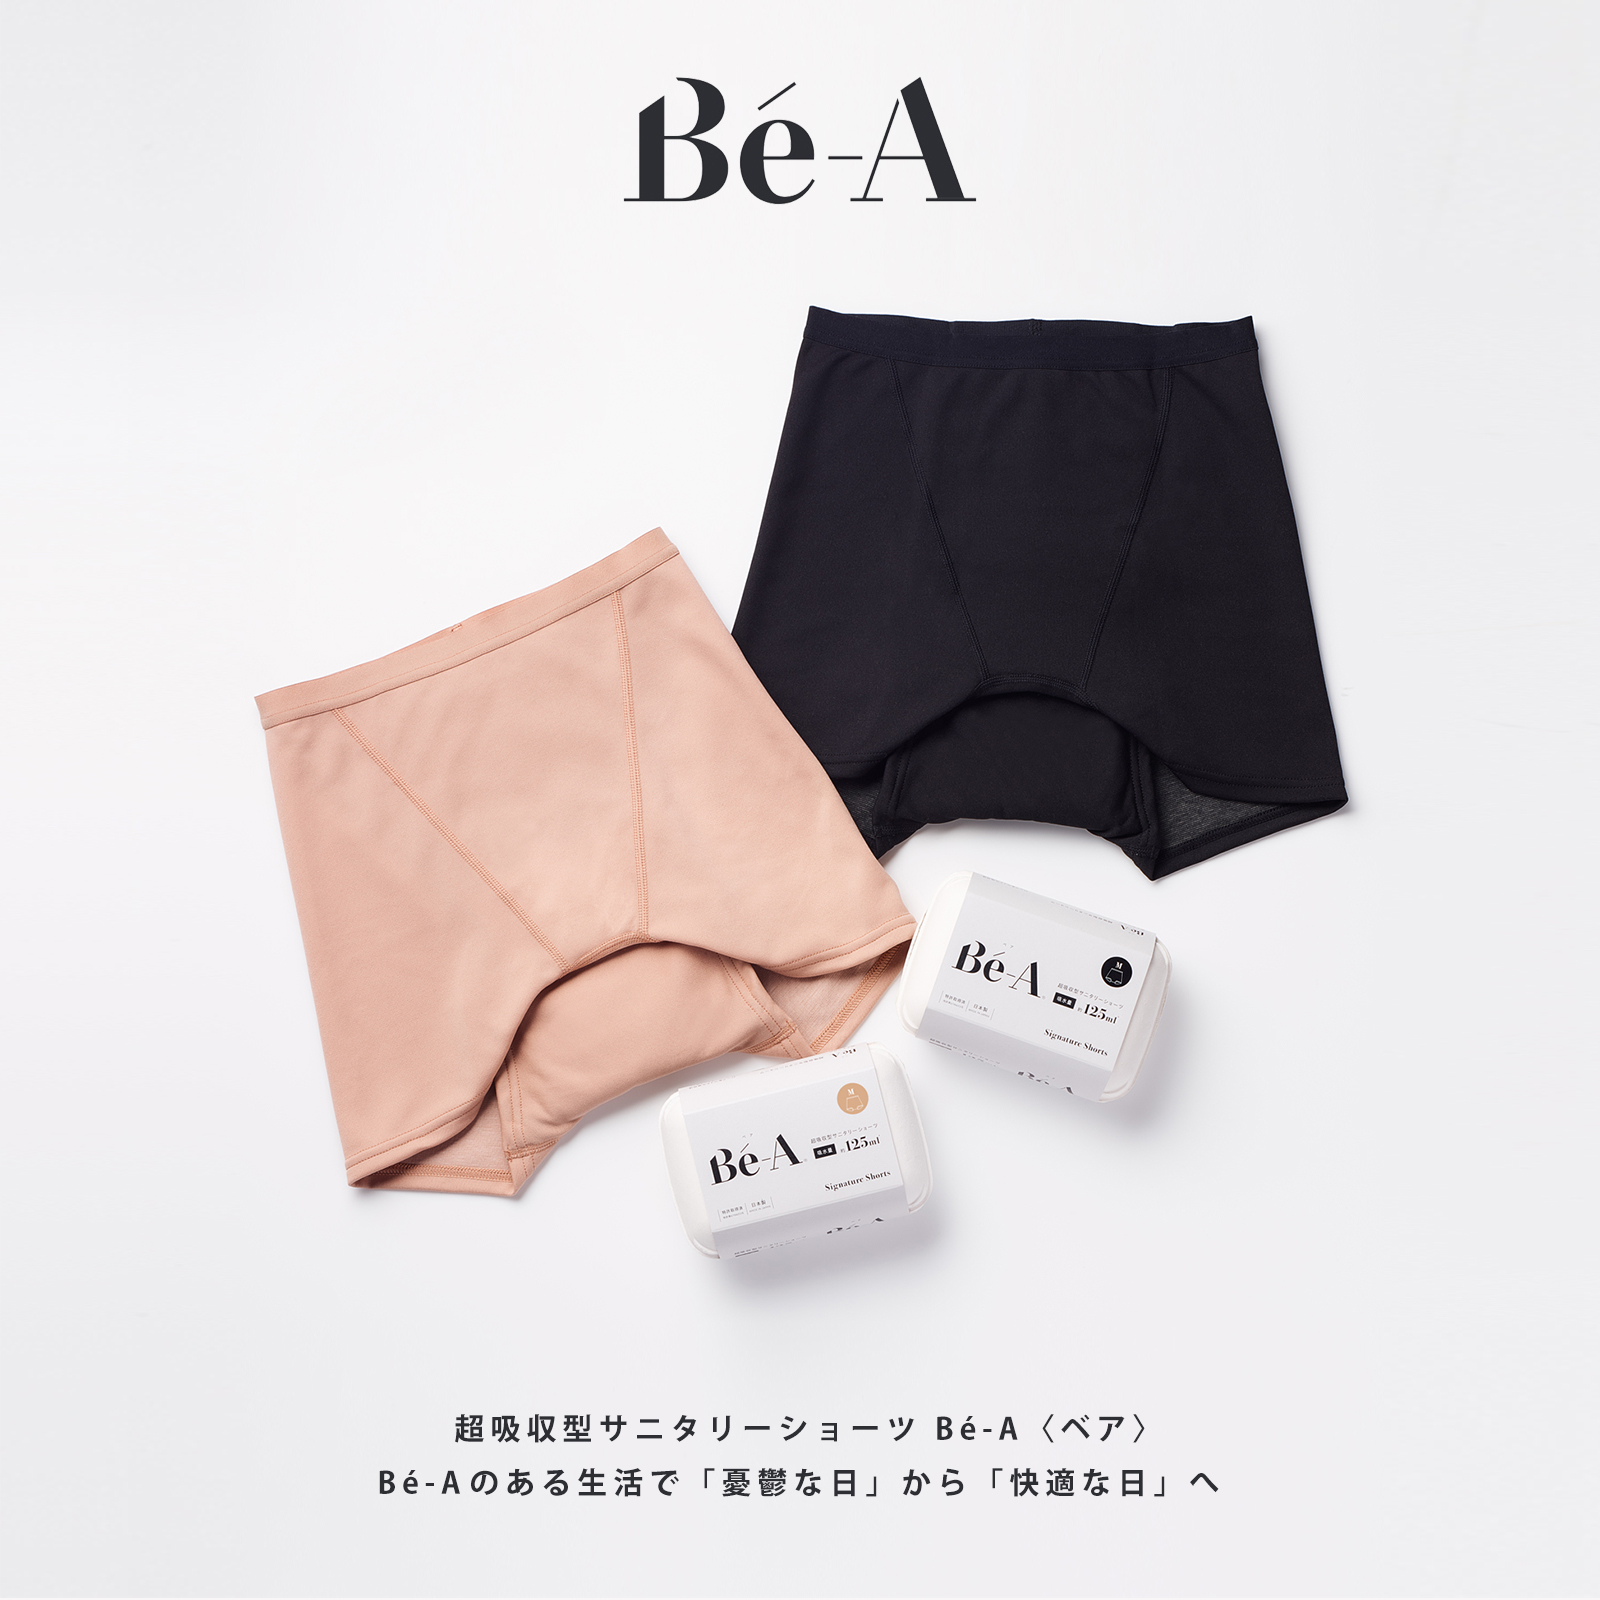 Be-A（ベア）